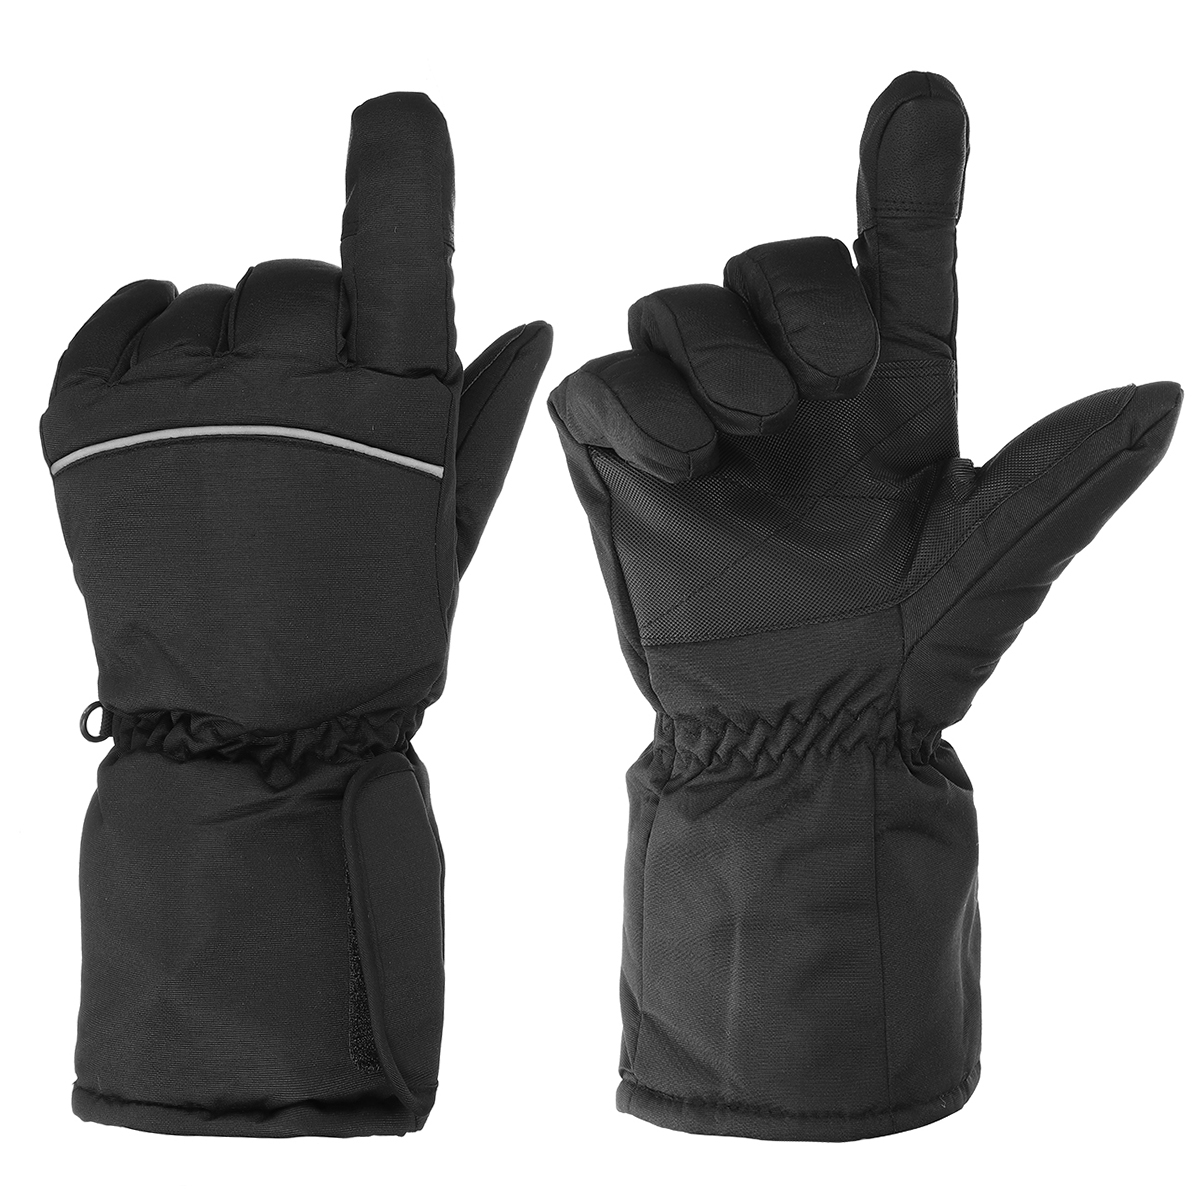 1-Pair-Electric-Heated-Gloves-Touchscreen-Warm-Battery-Gloves-Full-Finger-Waterproof-Heating-Thermal-1748583-11